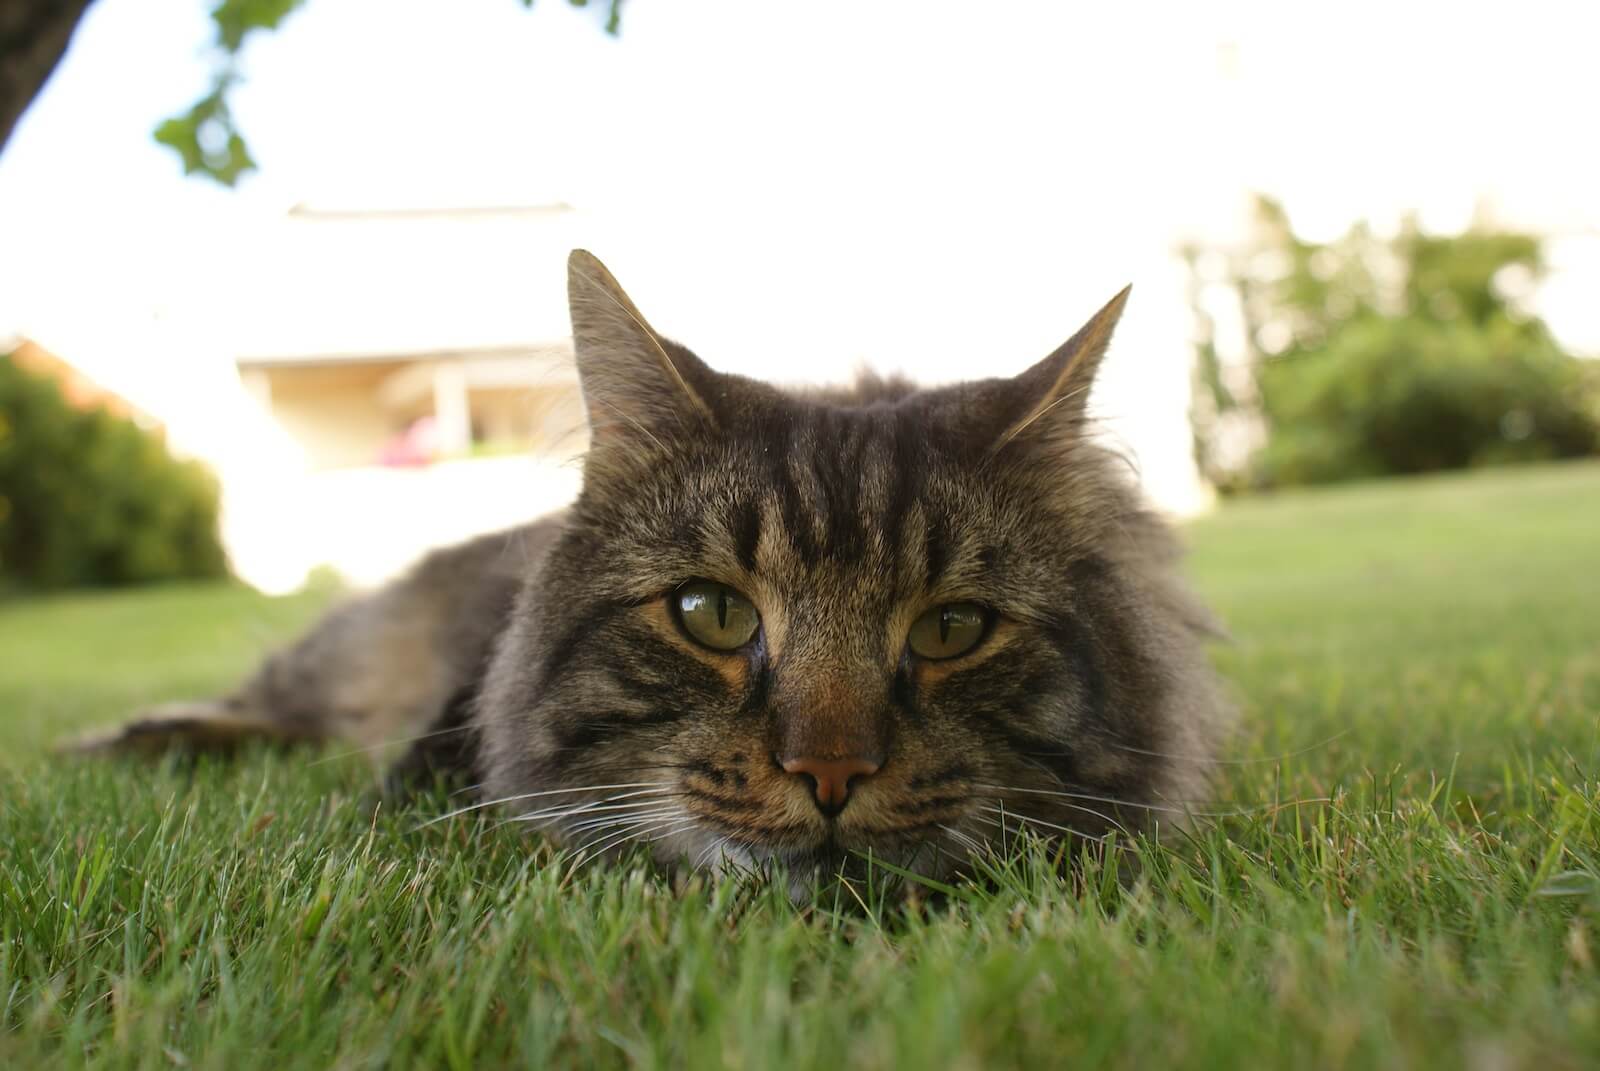 A cat laying in the grass looking at the camera